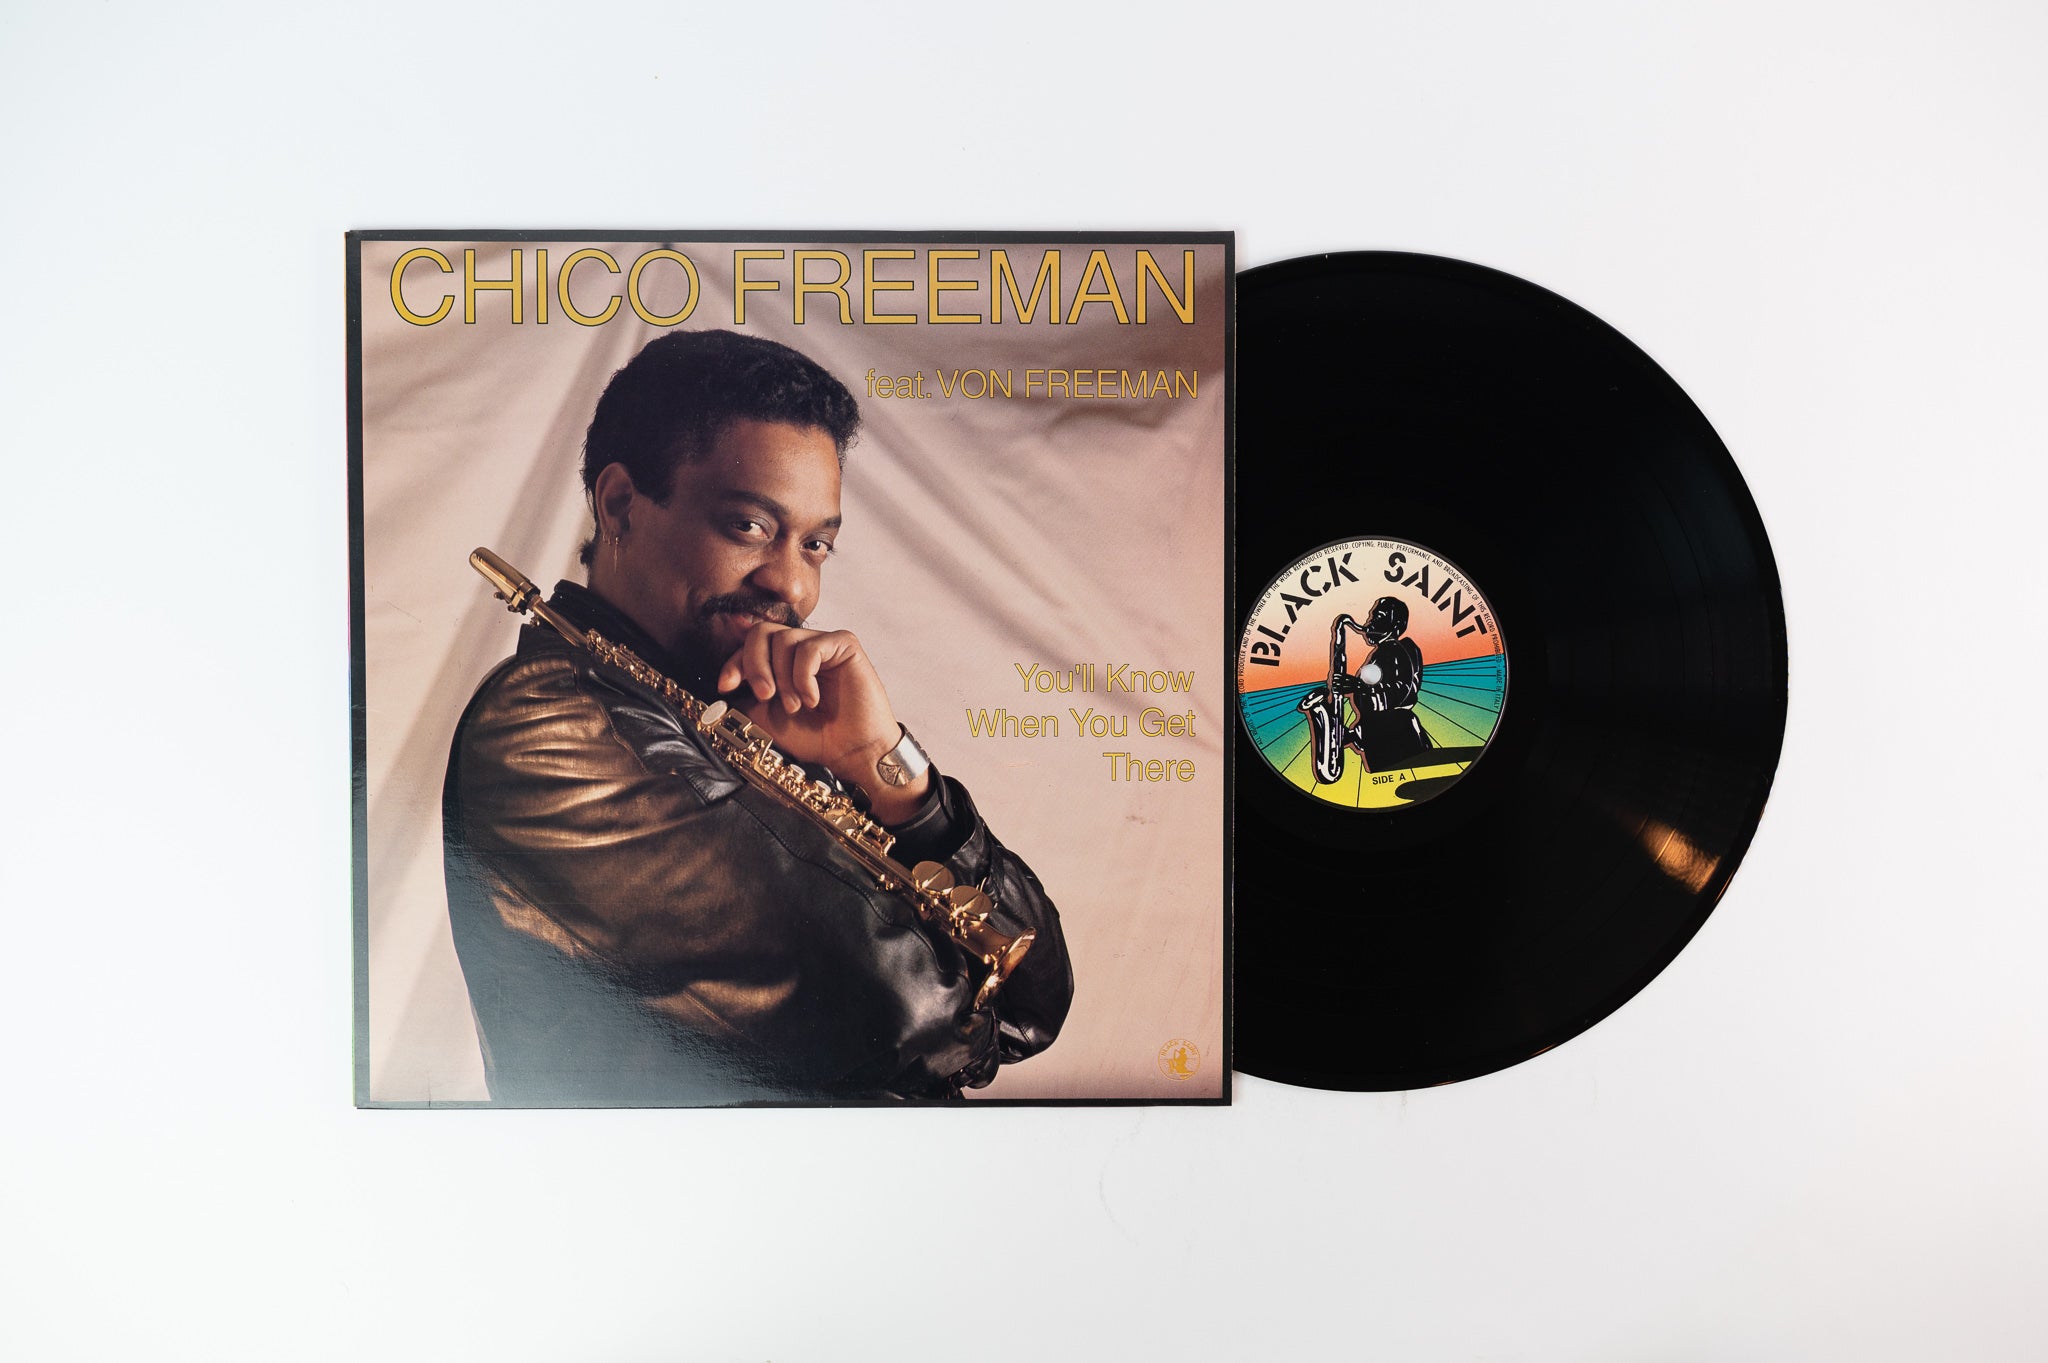 Chico Freeman - You'll Know When You Get There on Black Saint Italian Pressing